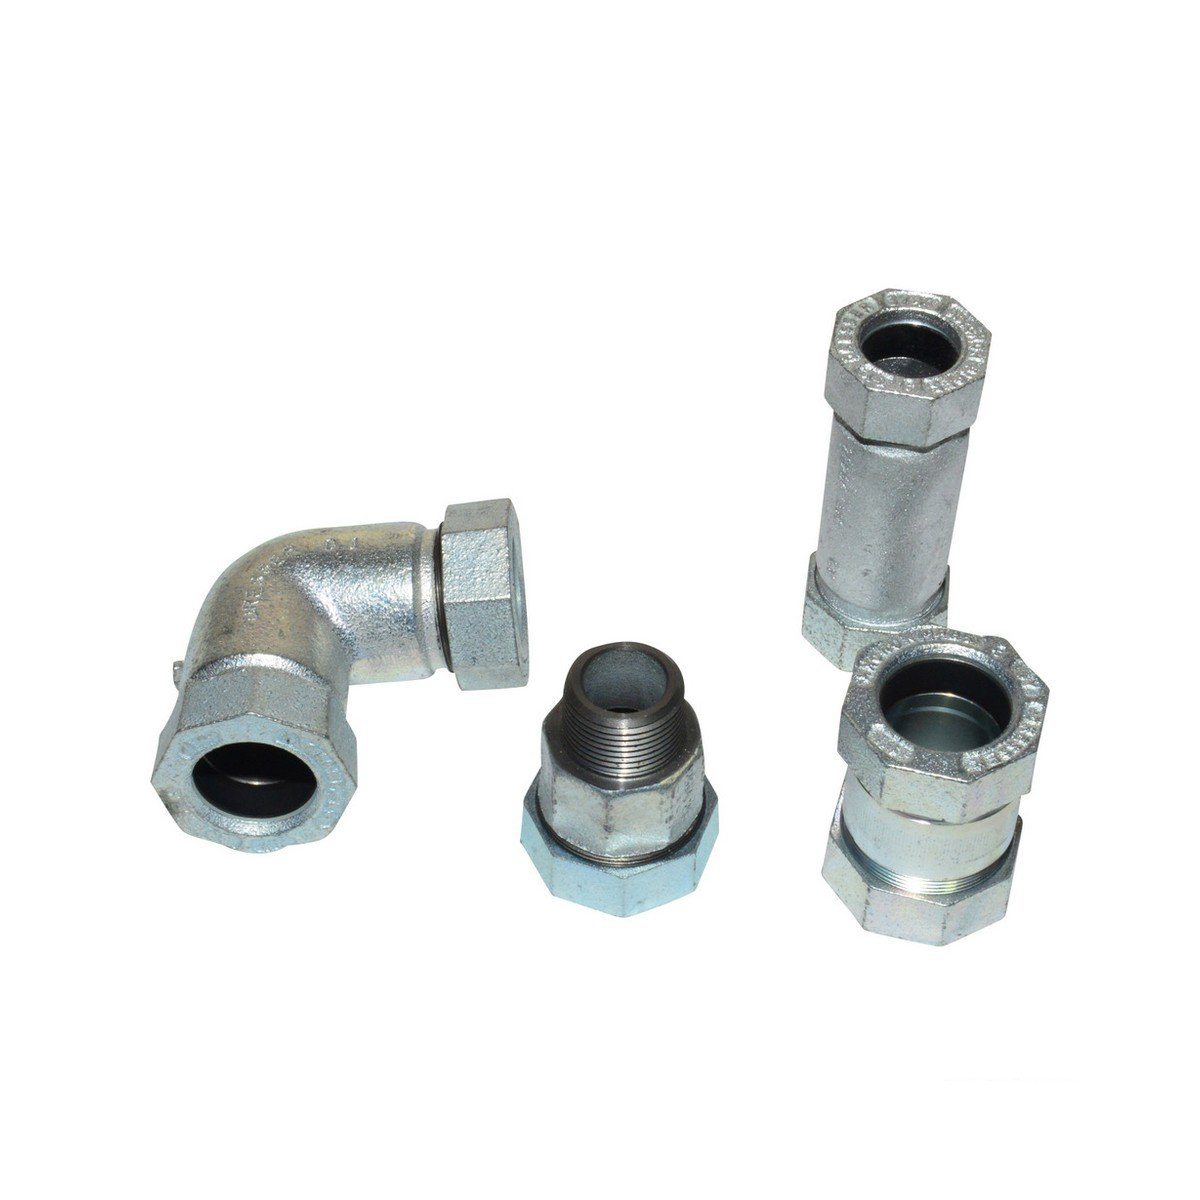 Compression fittings